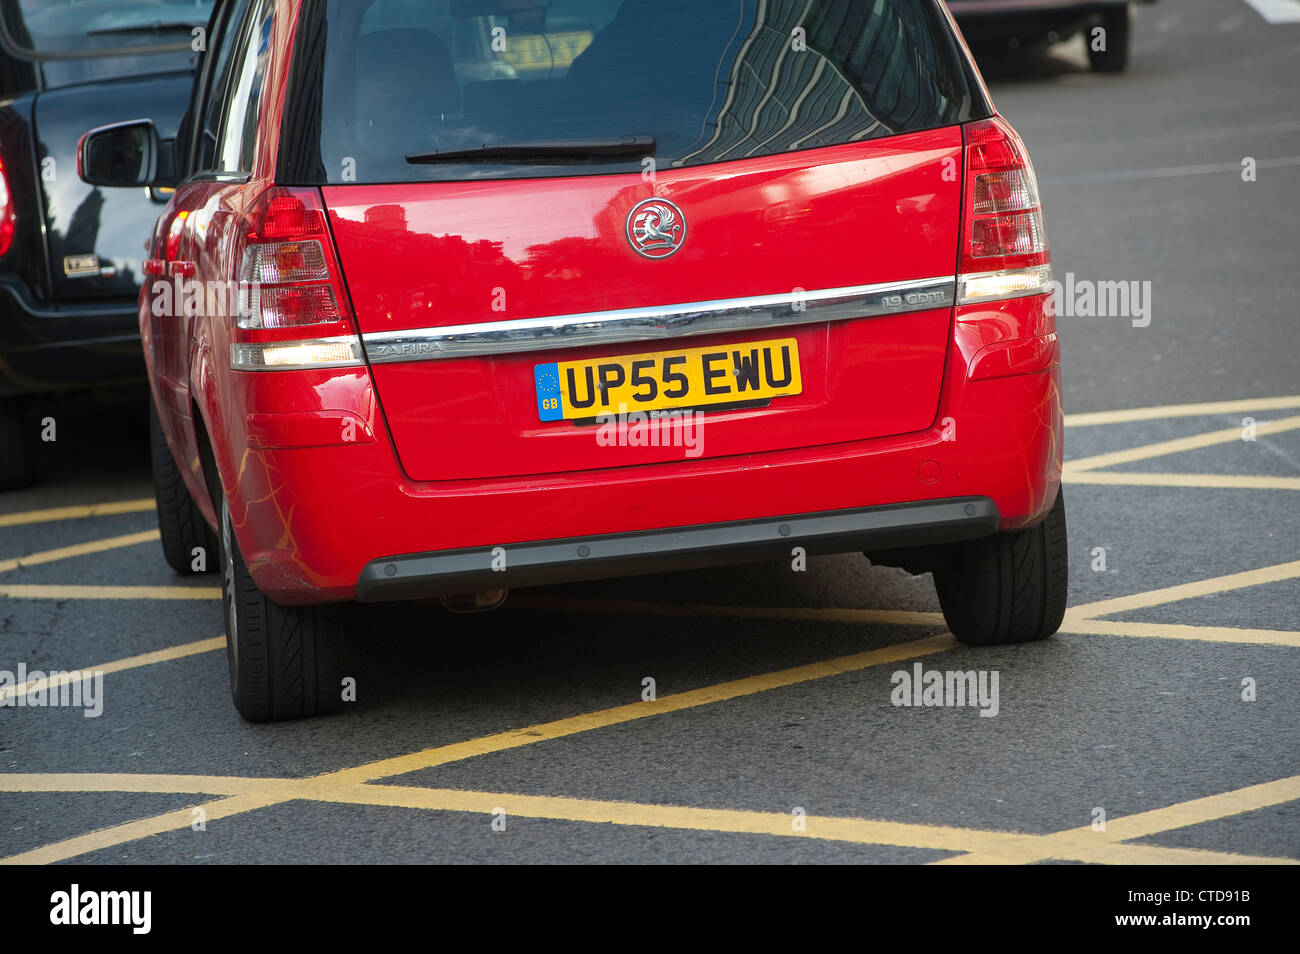 Close up of the rear of a car waiting in a yellow box junction in traffic, London, England. Stock Photo